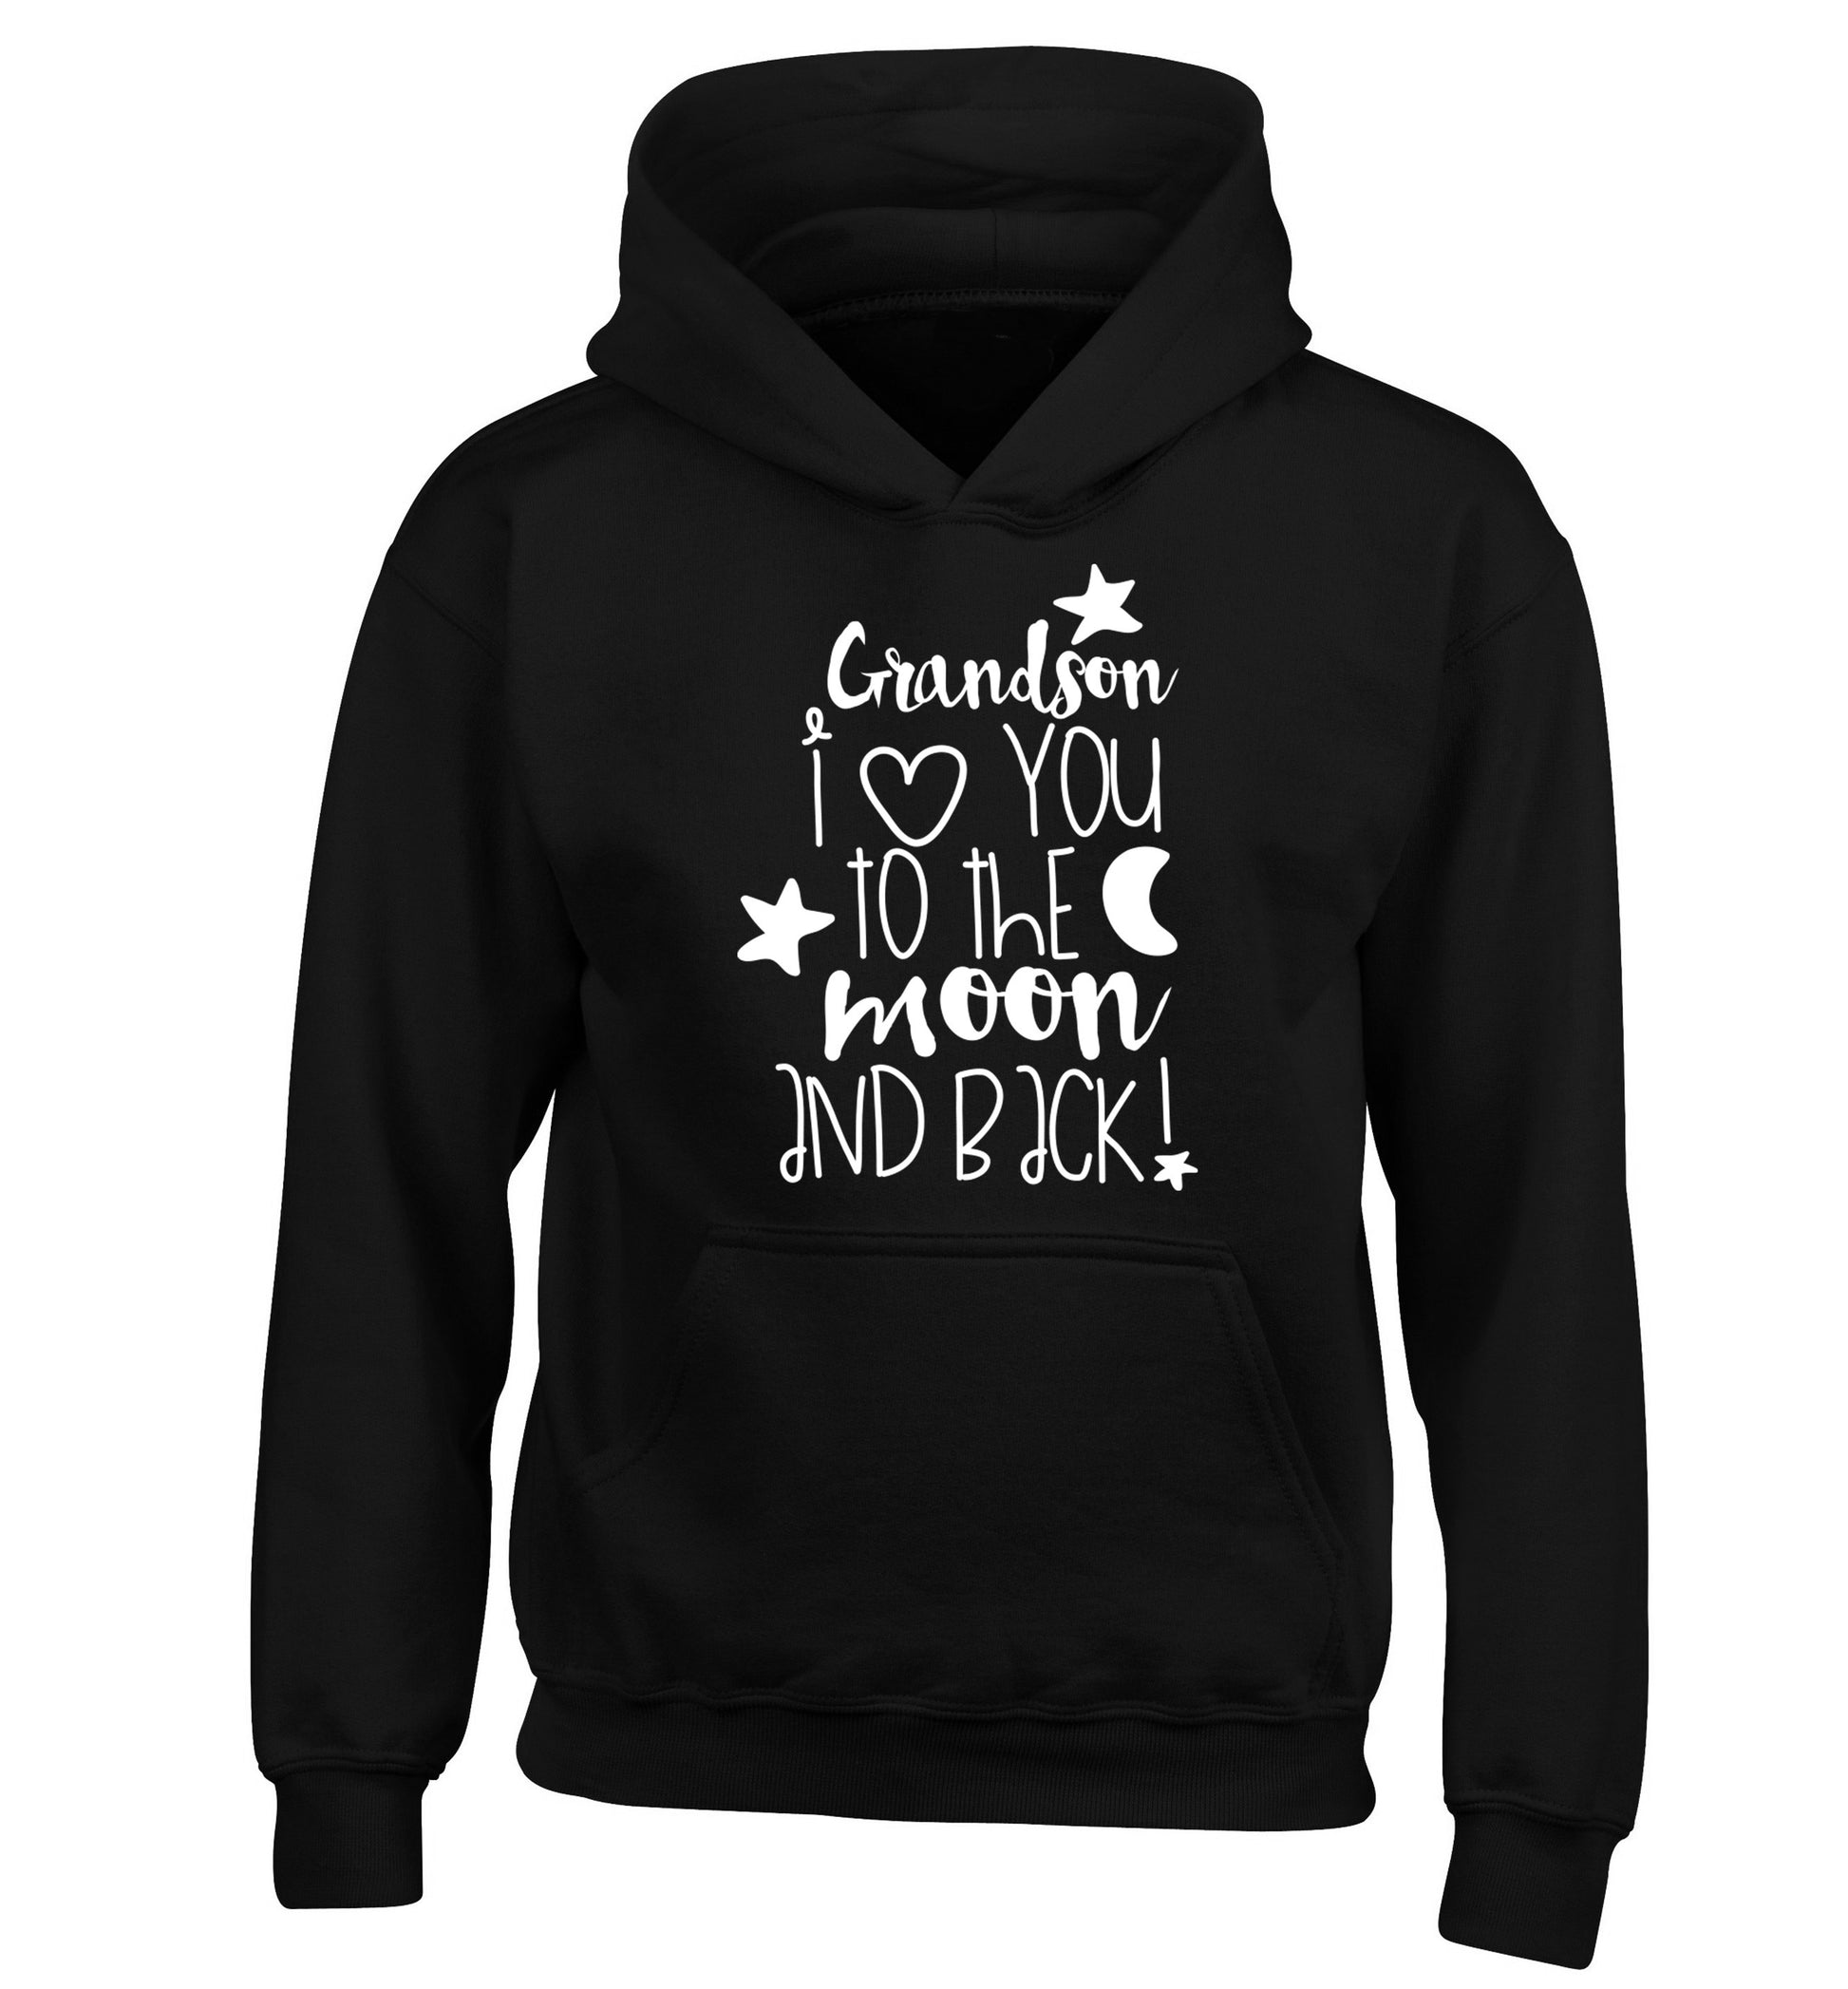 Grandson I love you to the moon and back children's black hoodie 12-14 Years